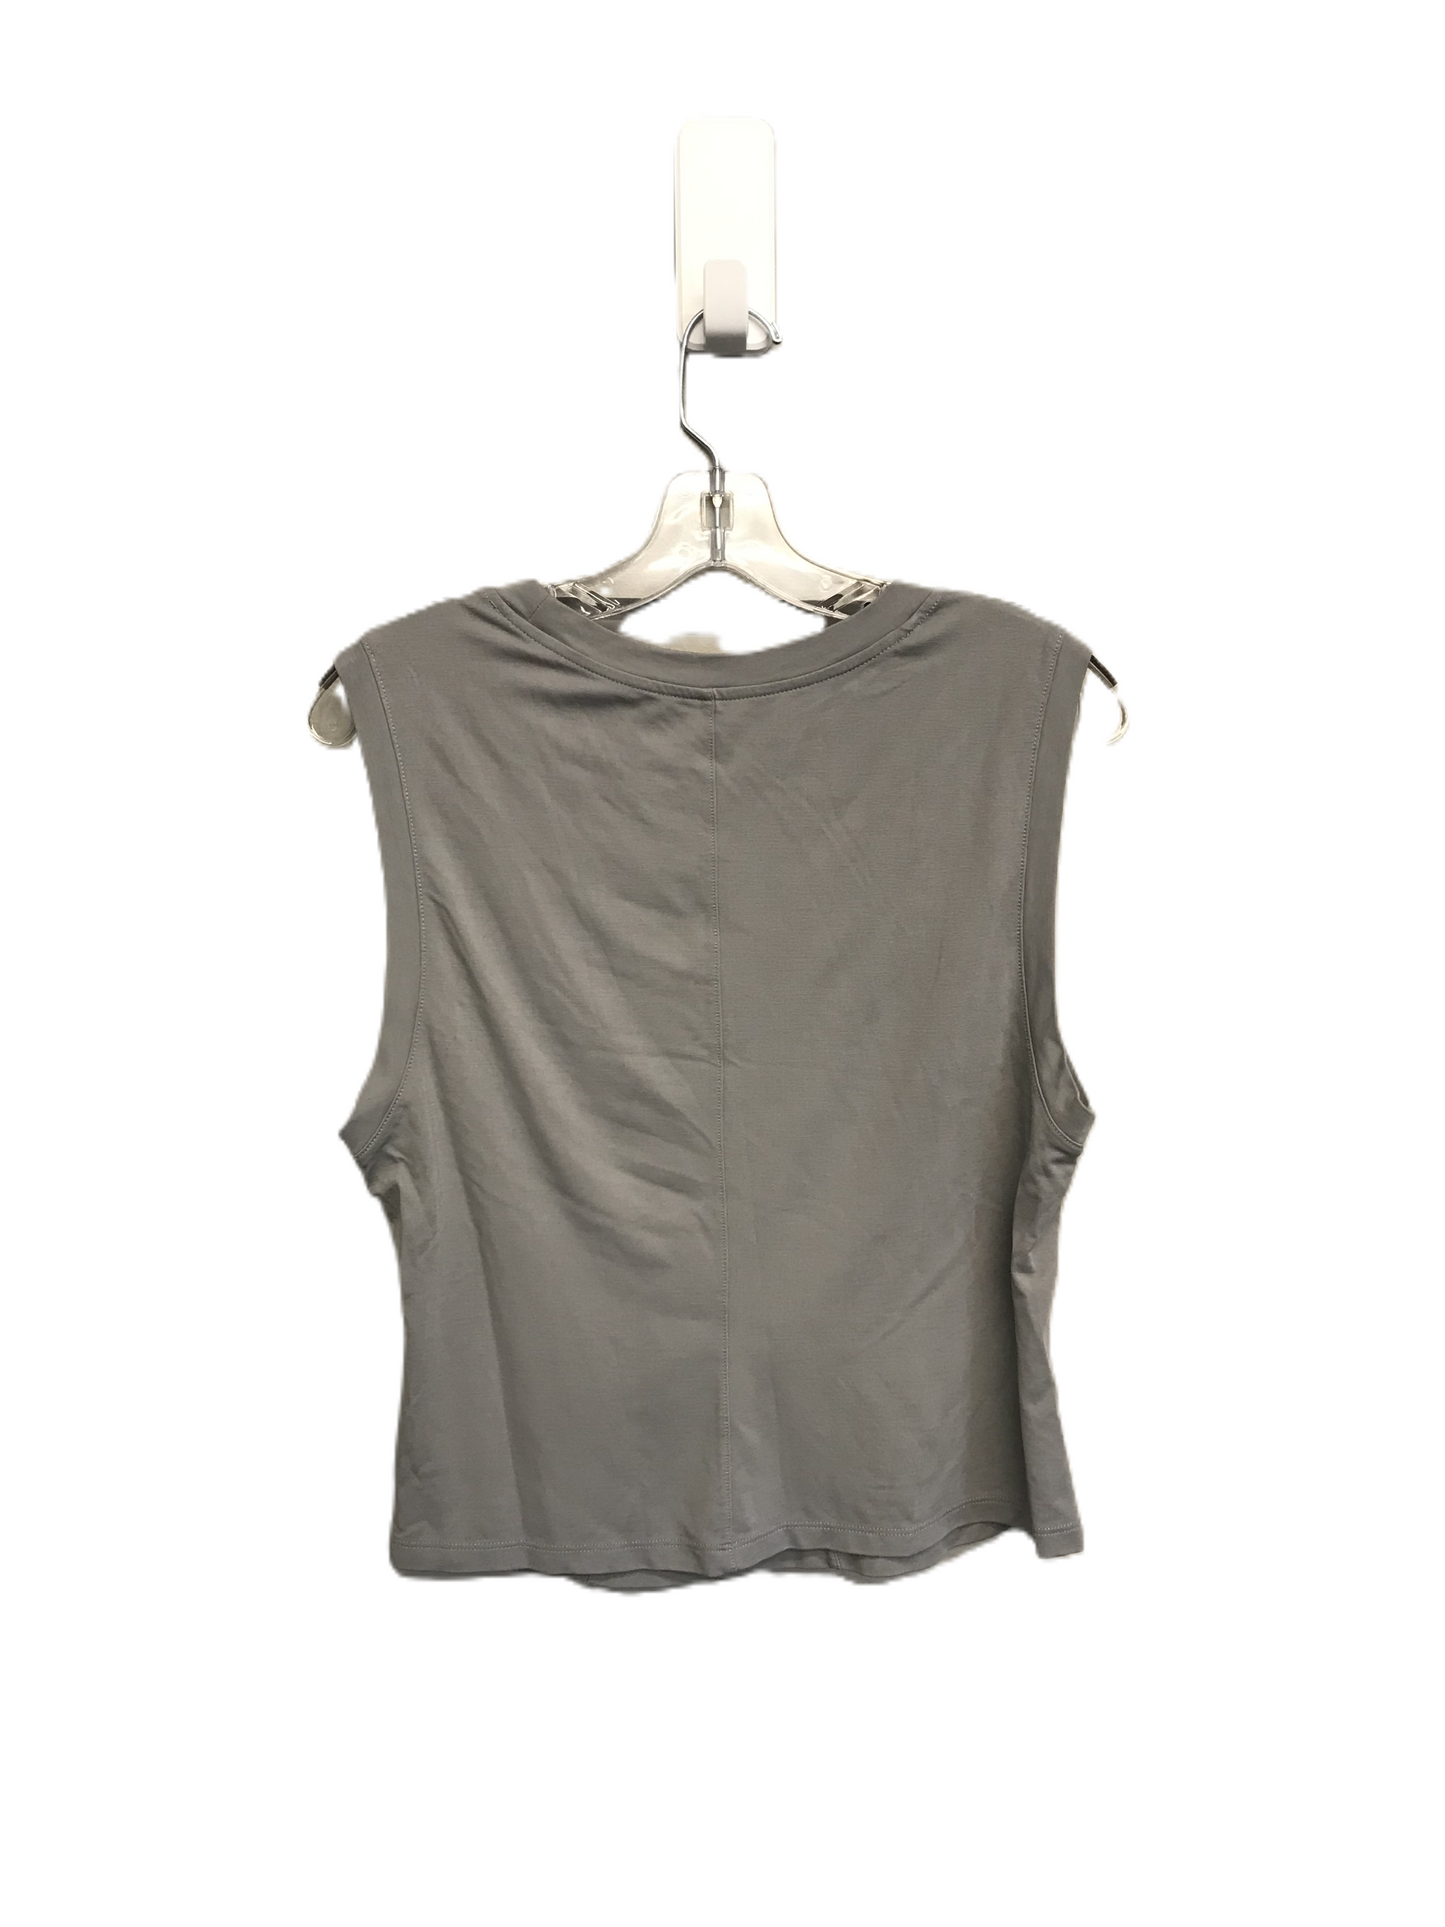 Grey Athletic Tank Top By Apana, Size: L